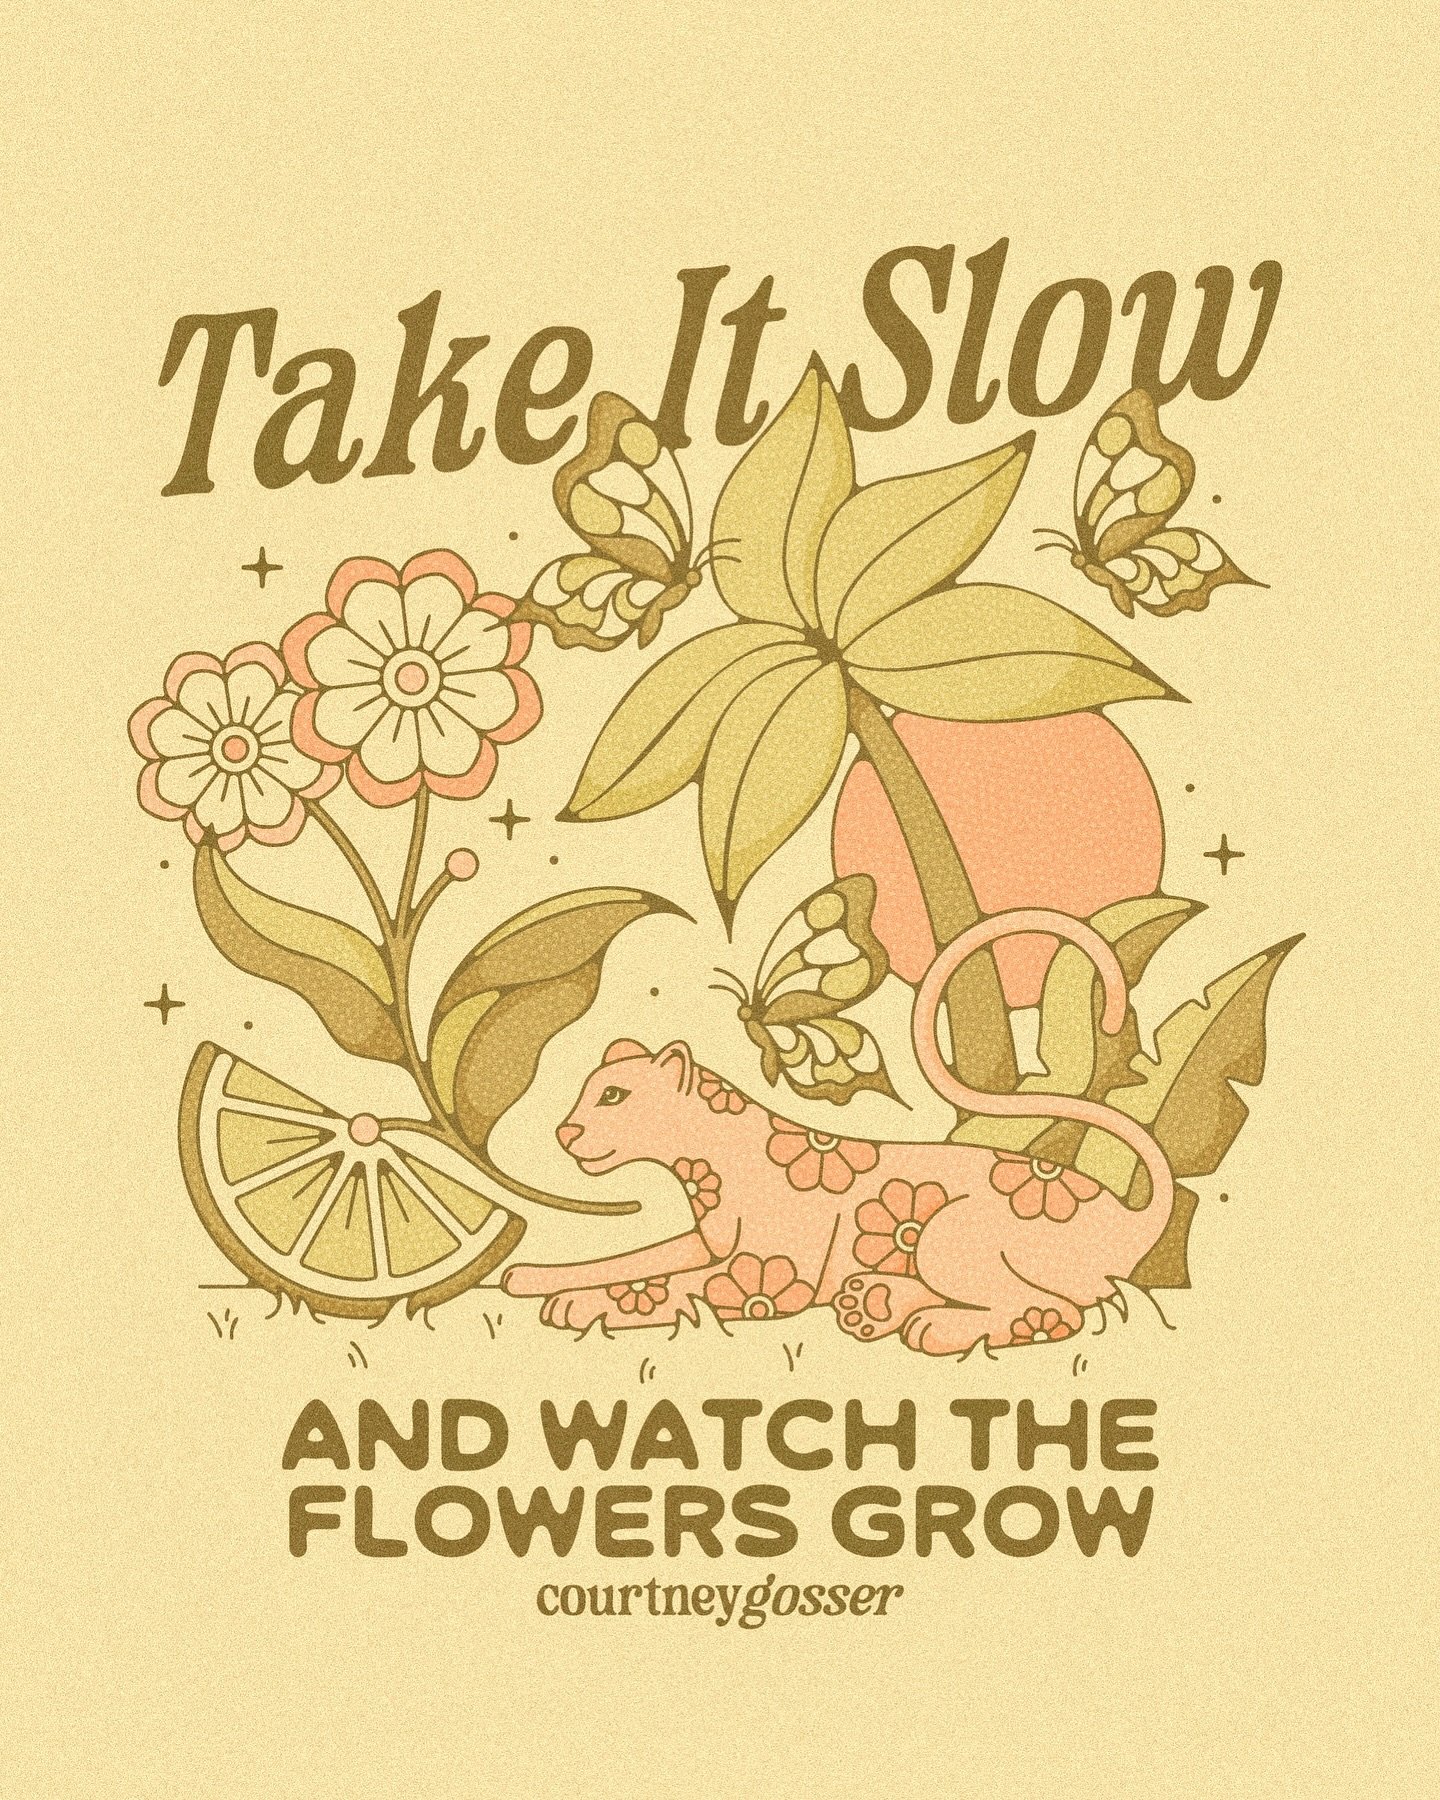 Take it slow and watch the flowers grow. 🌼